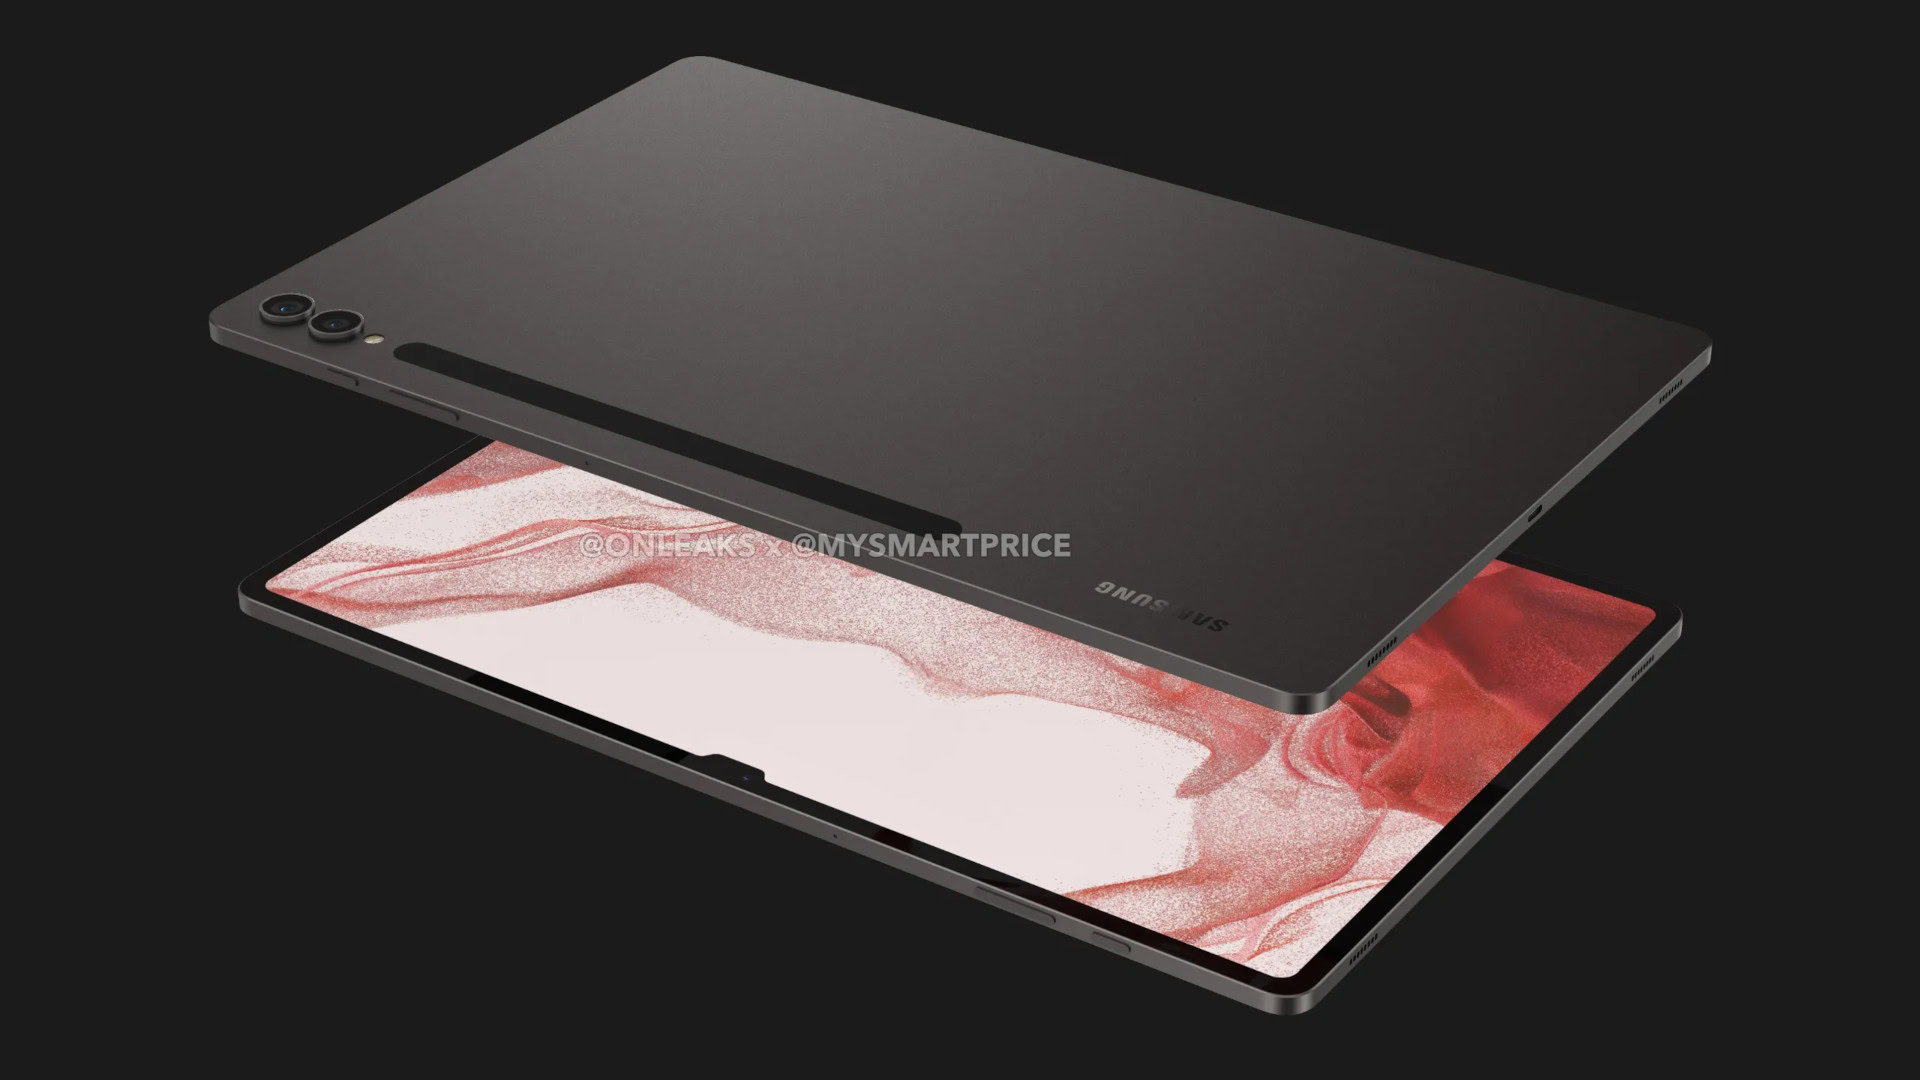 Samsung Galaxy Tab S9 Ultra Specs Leak Reveals A Beastly Android Tablet,  S9+ Pictured